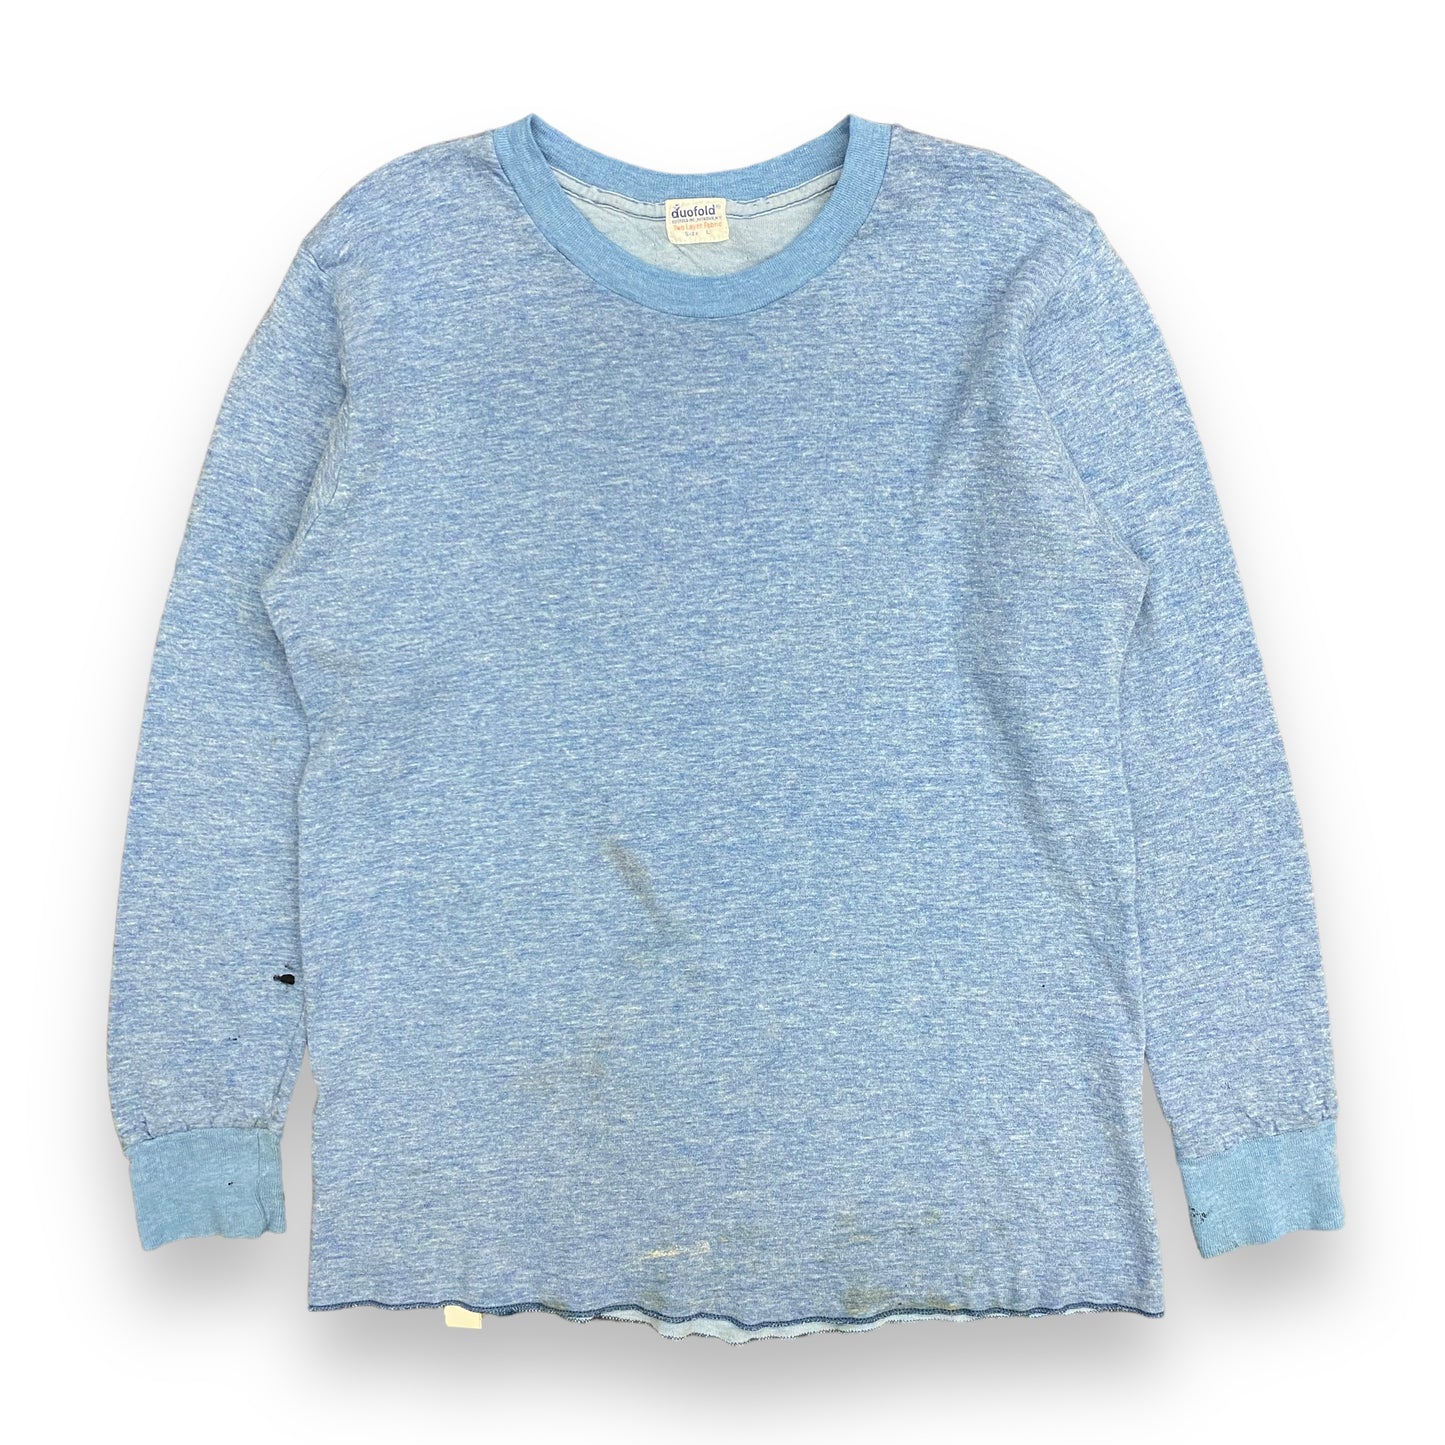 Vintage Thrashed 1970s Duofold Light Blue Long Sleeve Thermal - Size Large